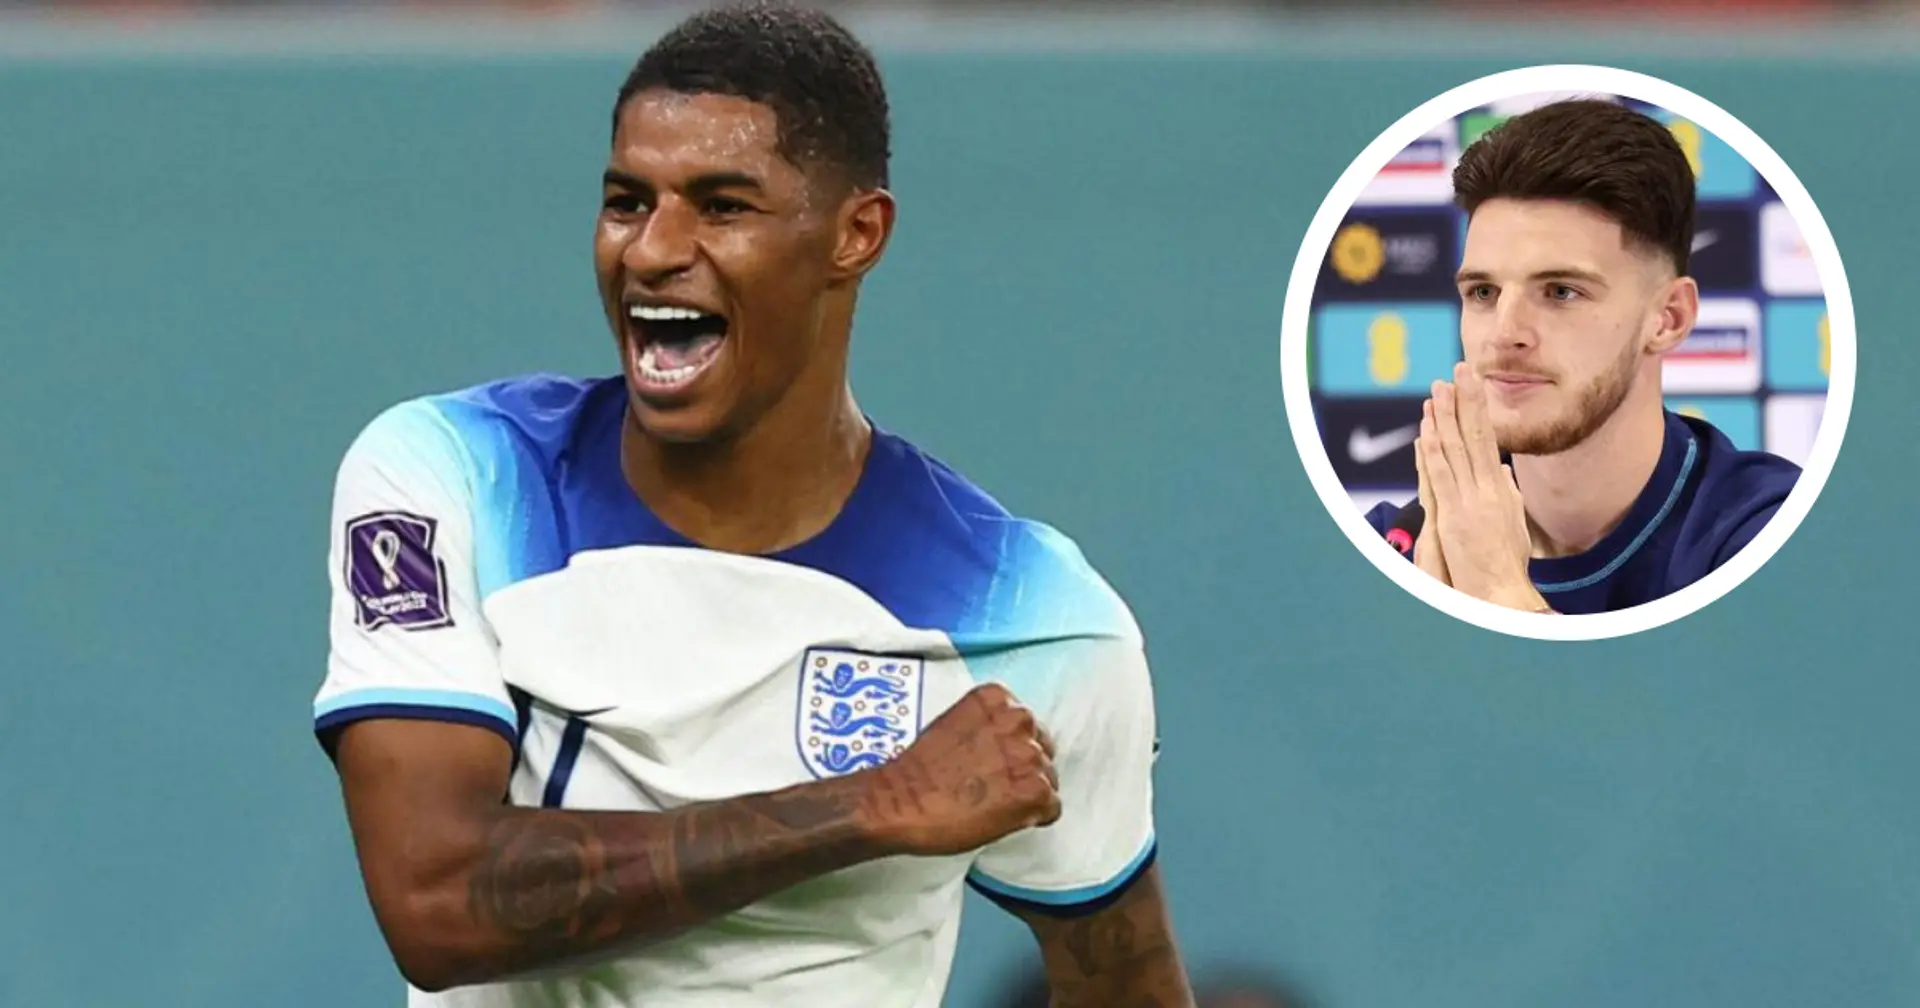 West Ham's Declan Rice backs Marcus Rashford to compete for World Cup Golden Boot